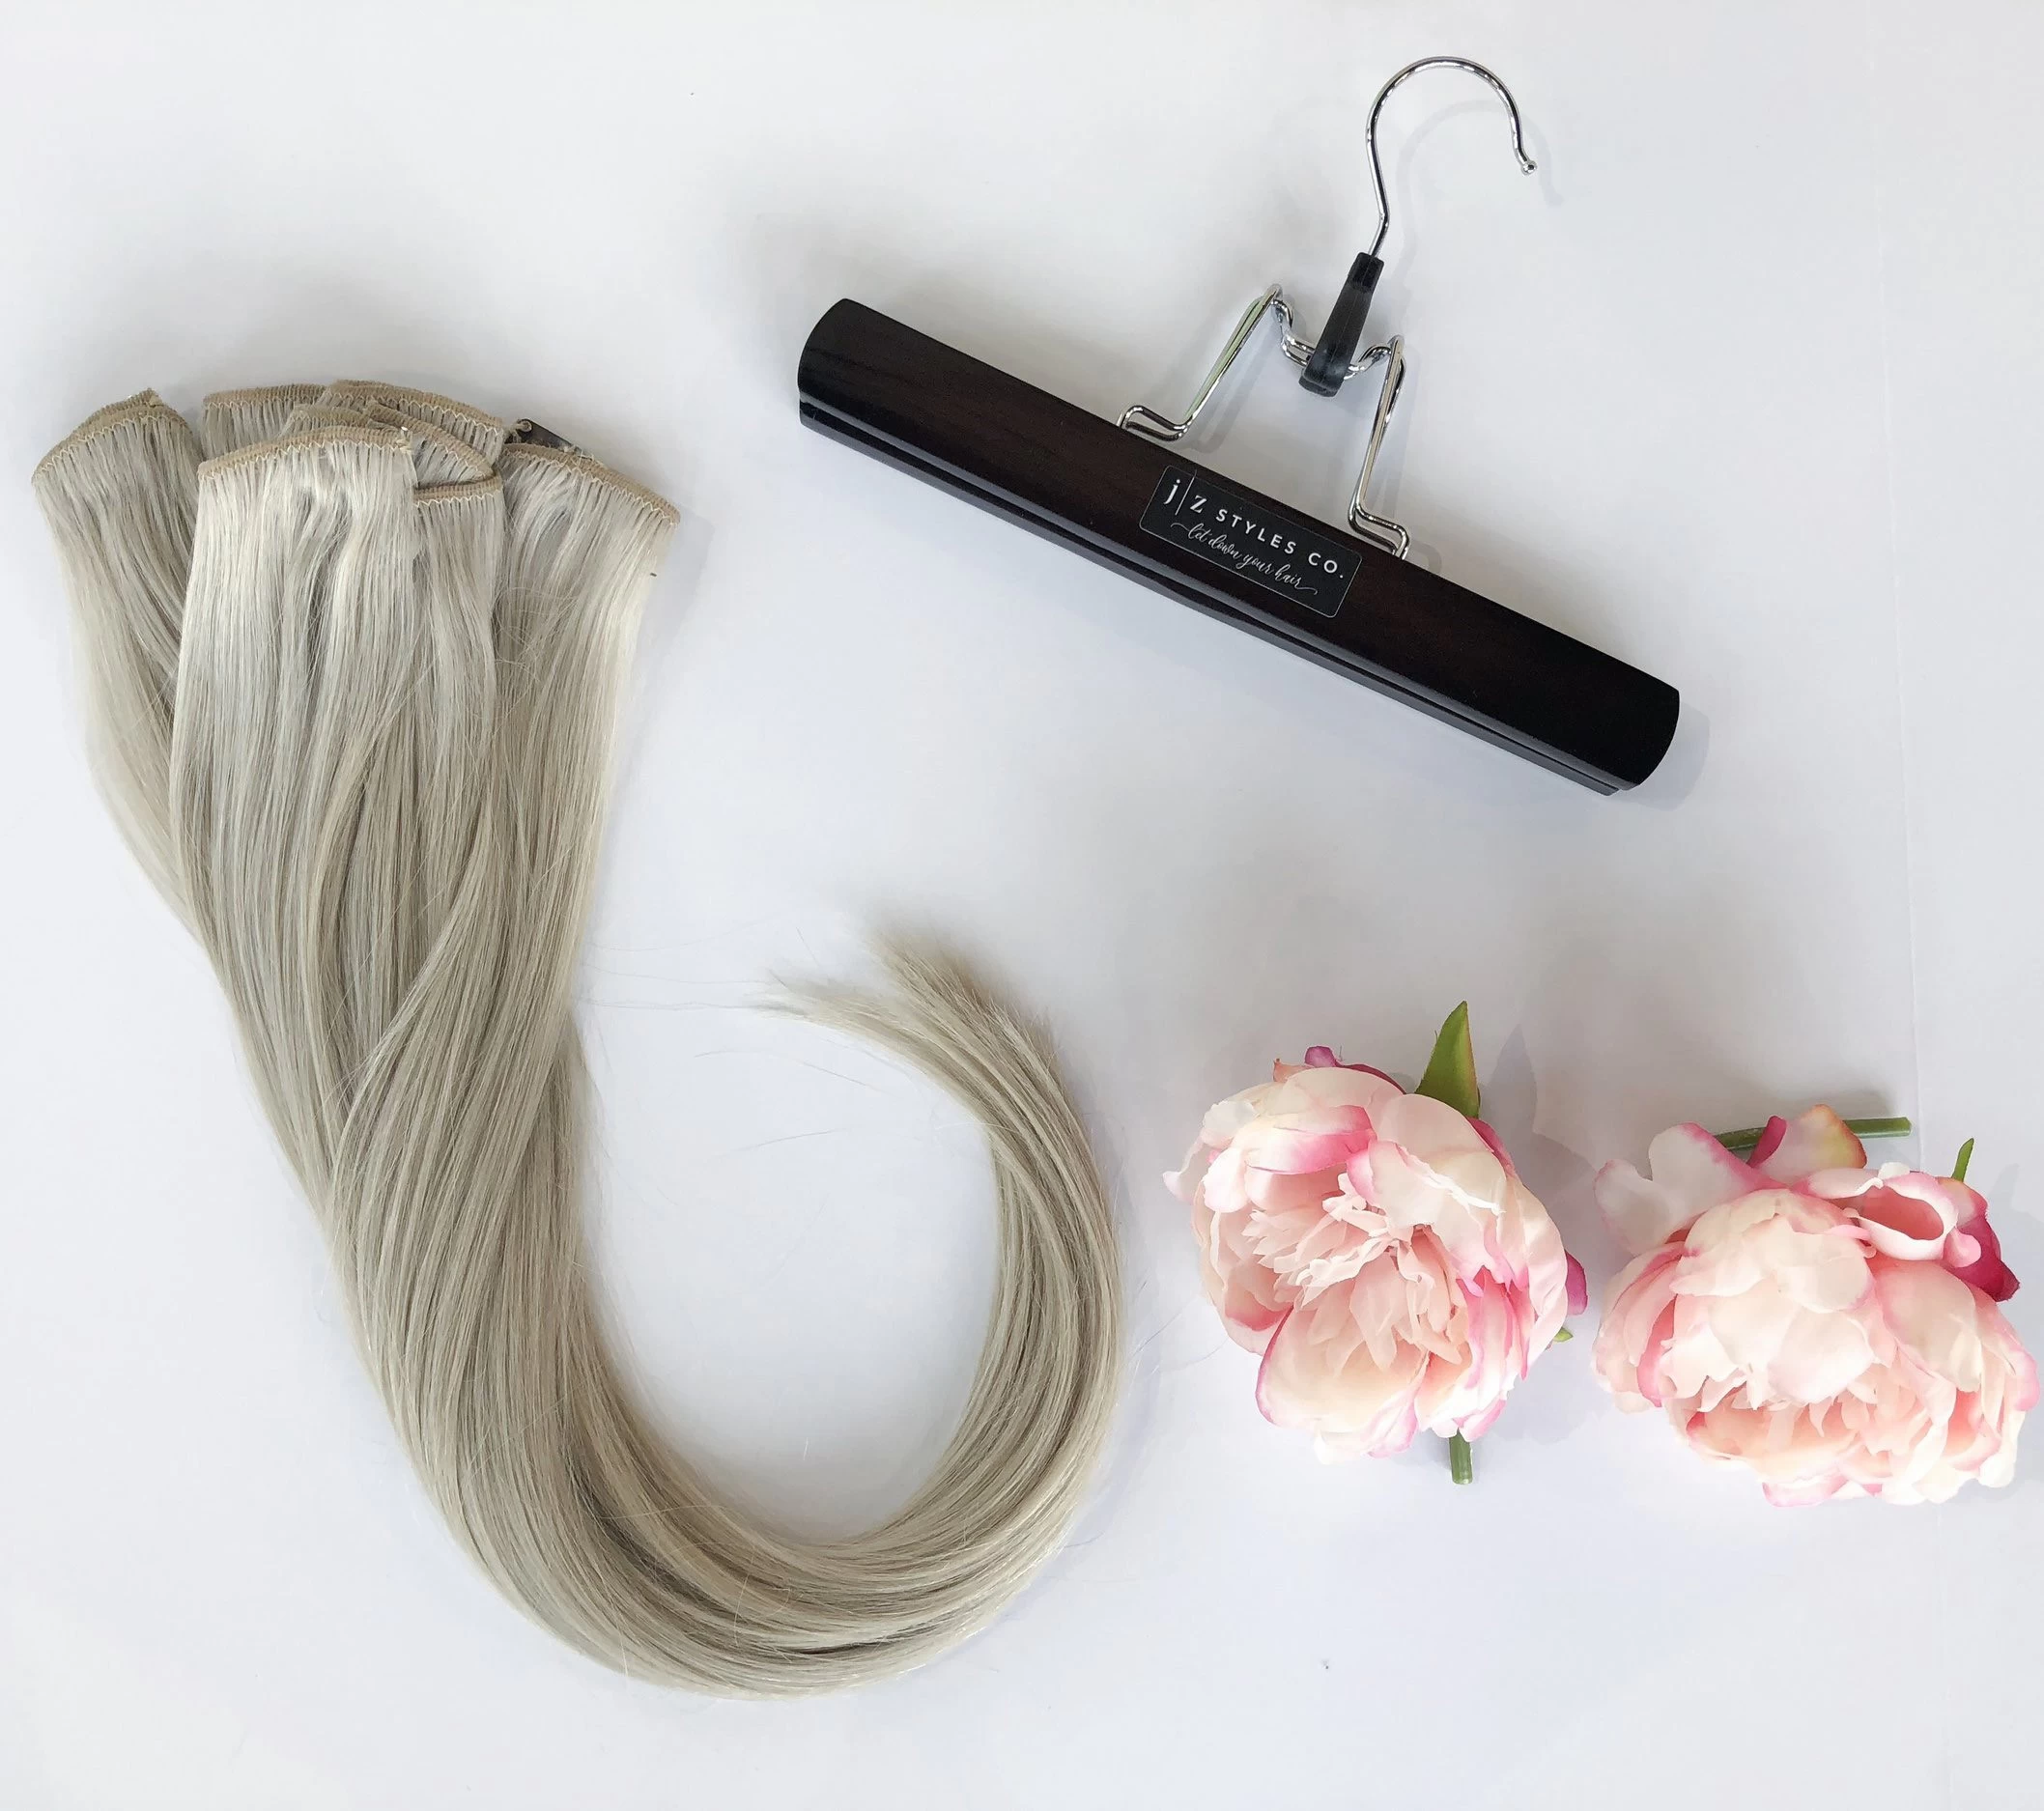 Hair extension hanger and bag